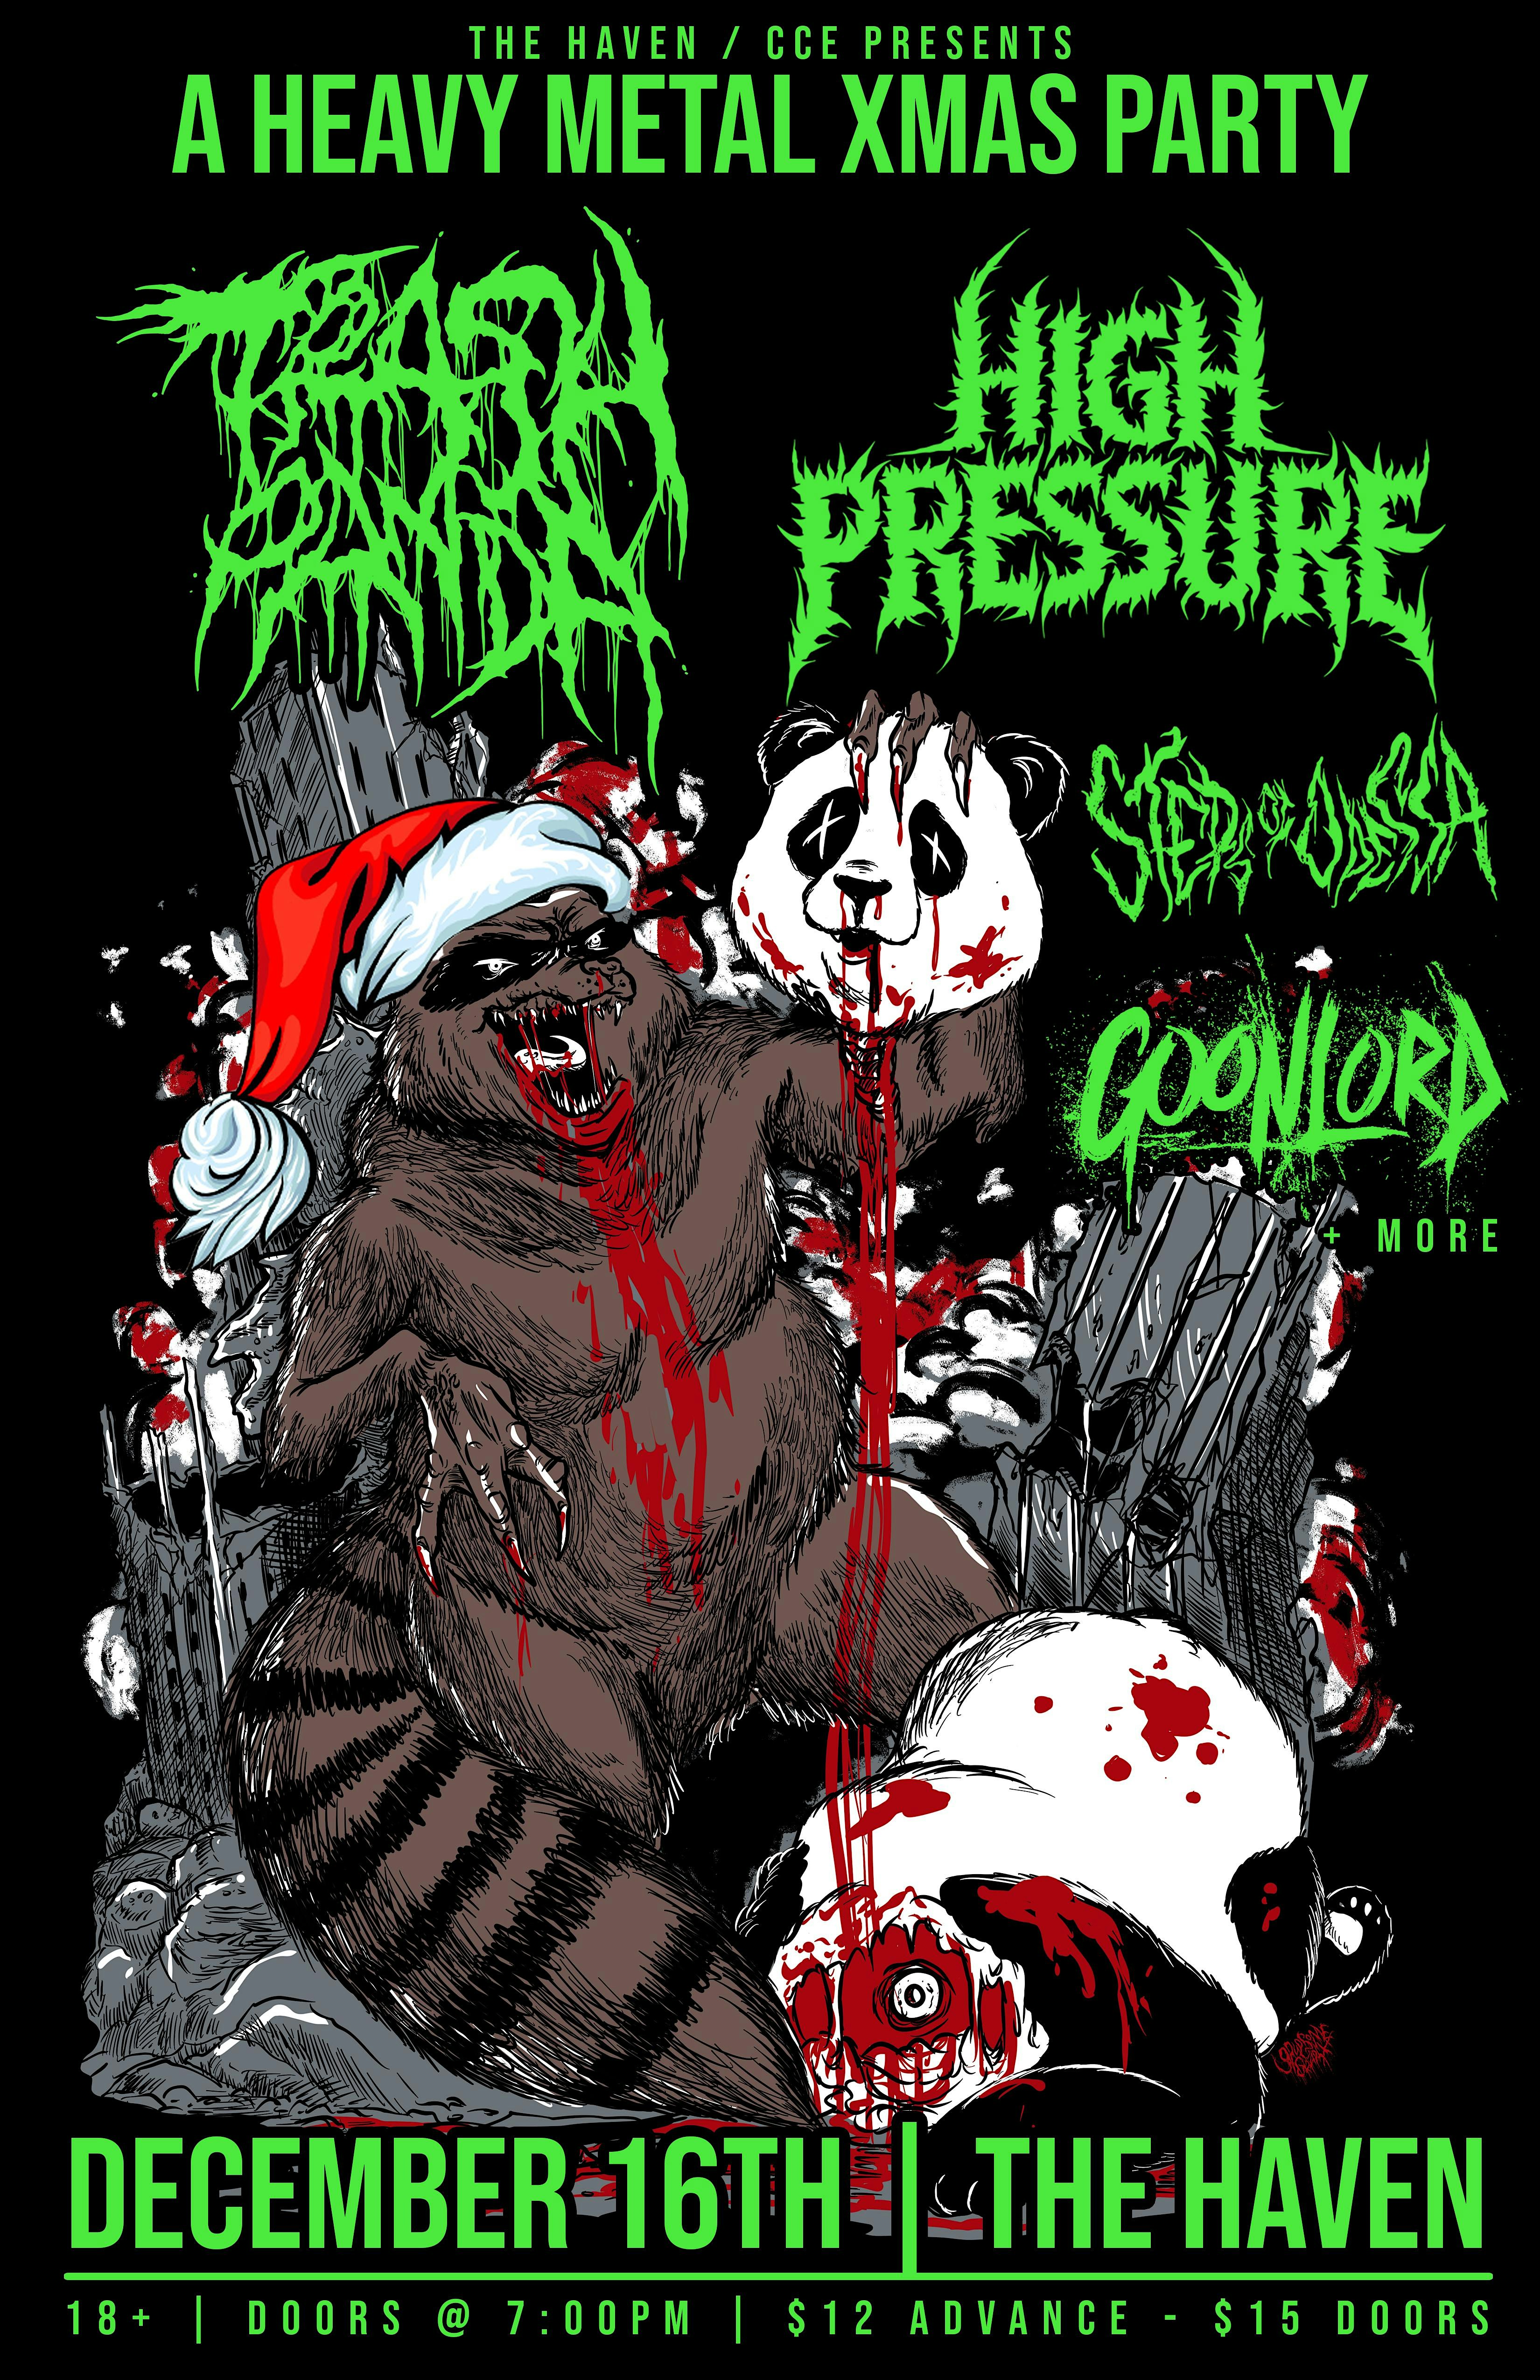 A Heavy Metal Xmas Party in Orlando w/ Trash Panda, High Pressure, Steps of Odessa, and Goonlord at the Haven